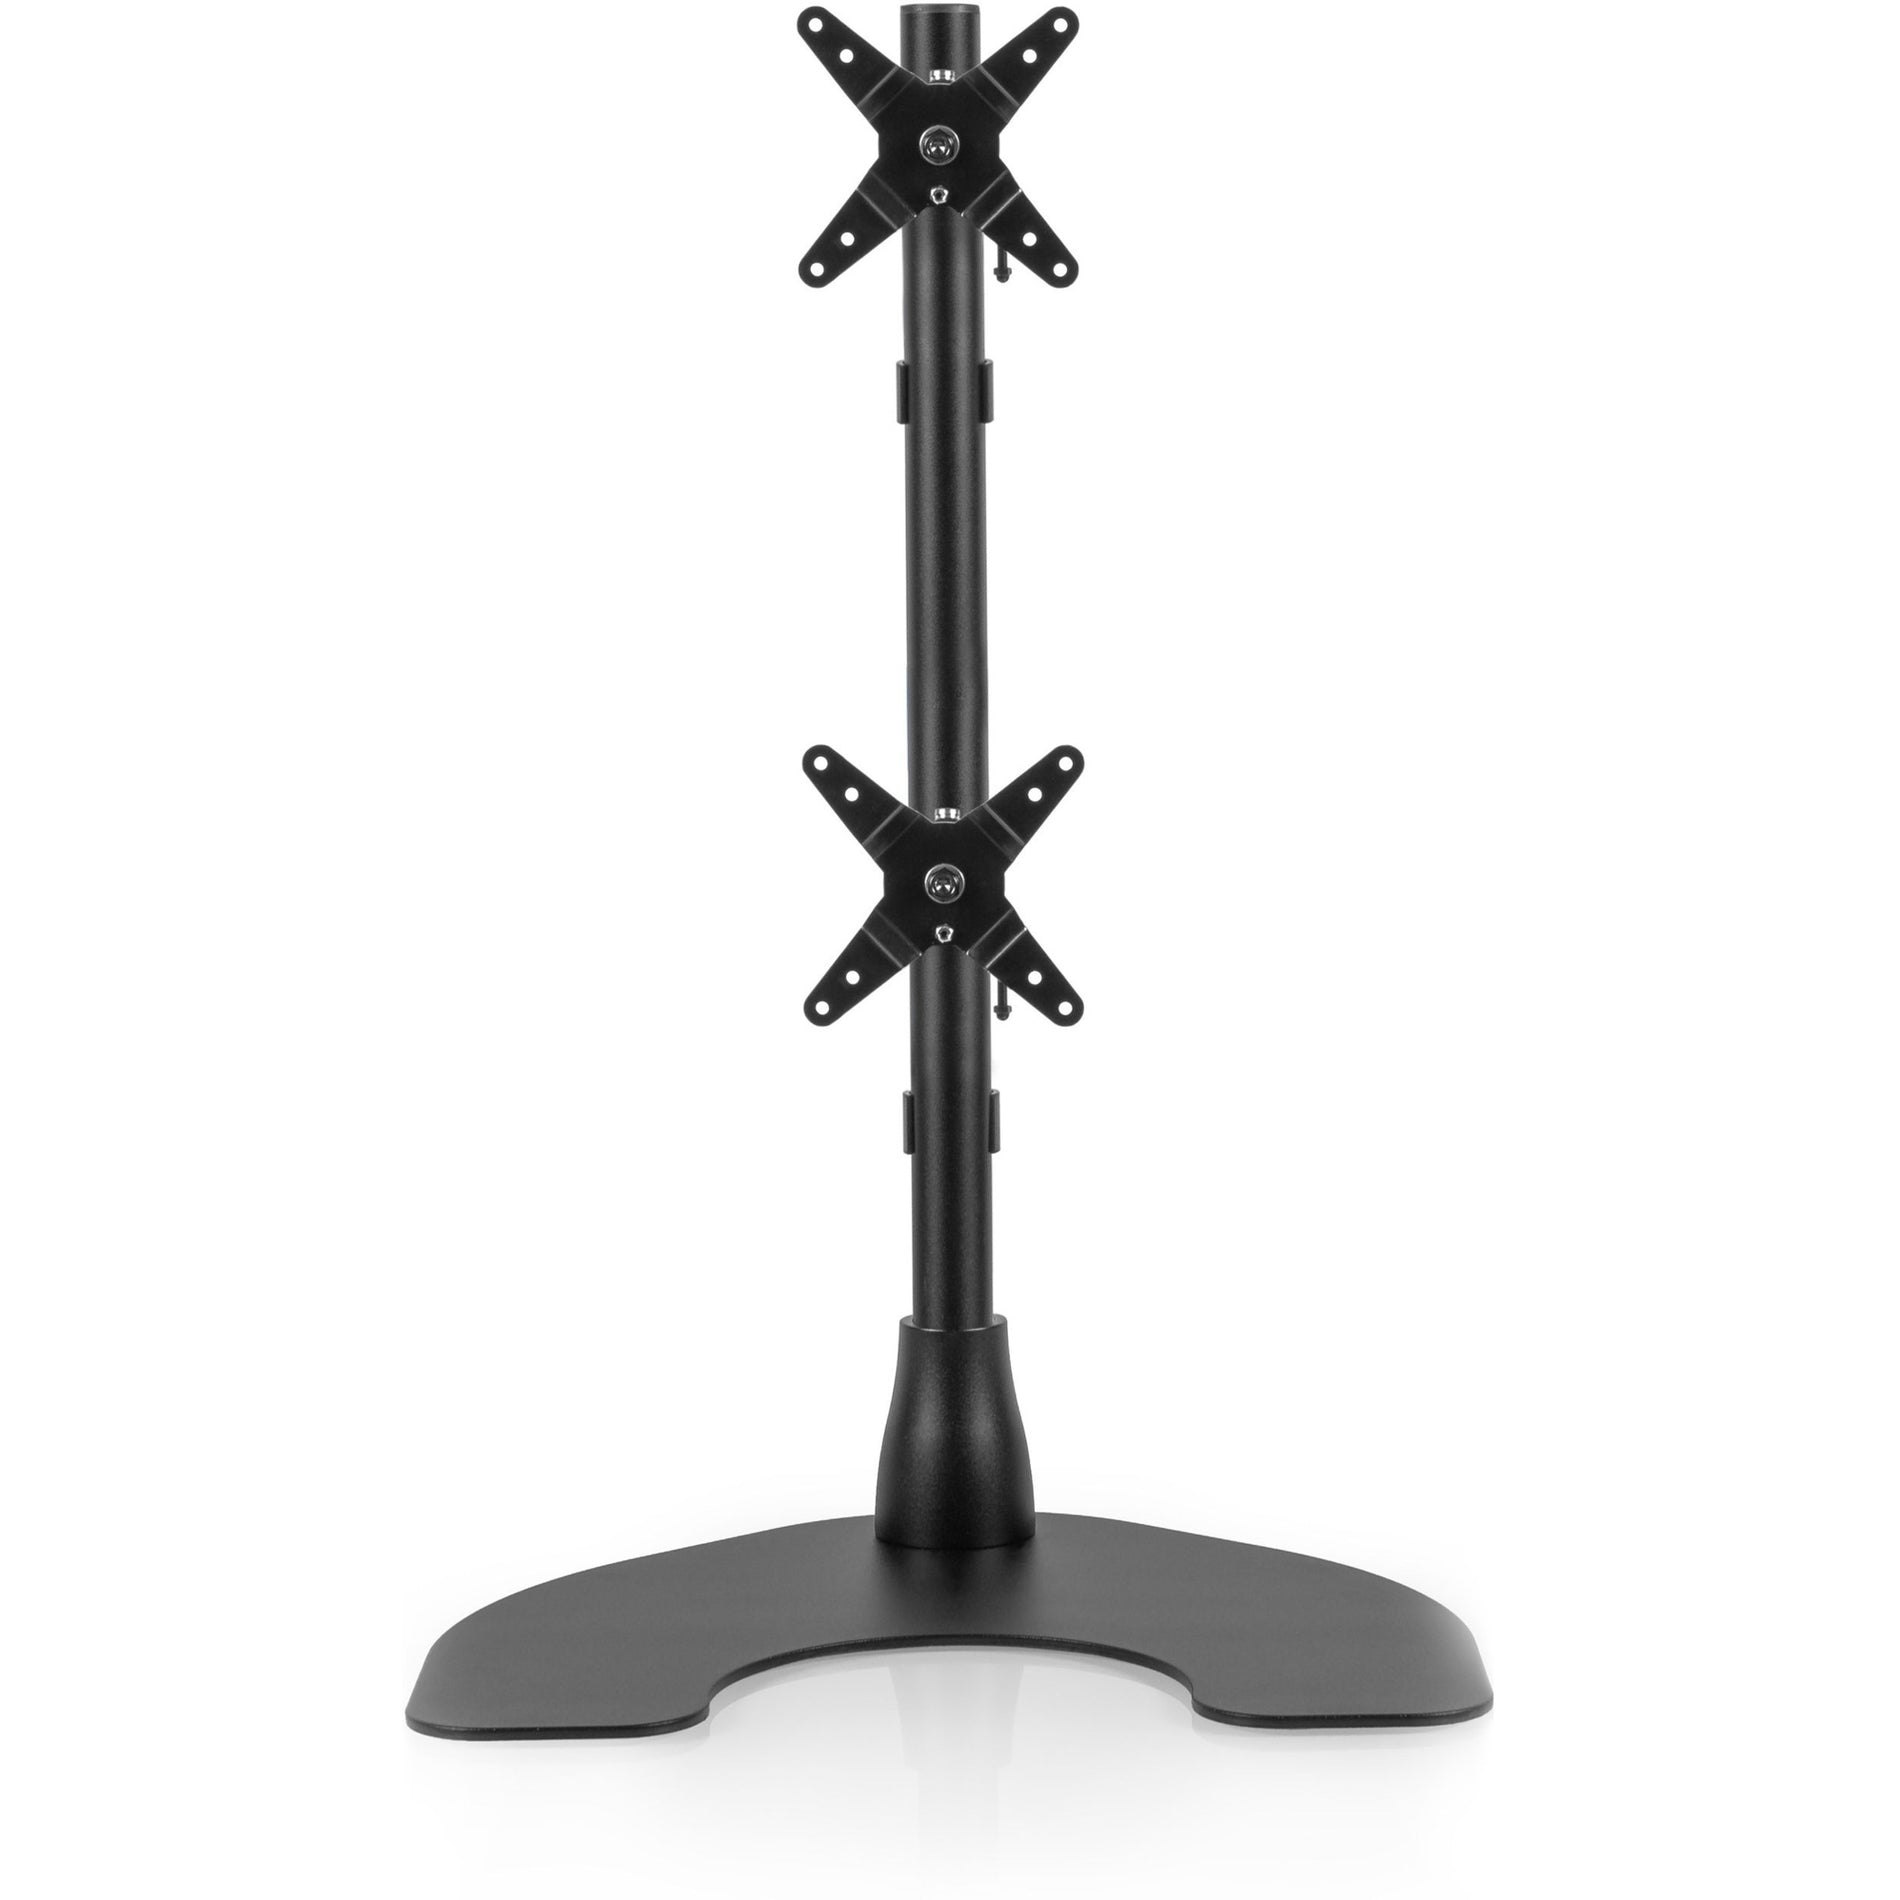 Ergotech 100-D28-B11 Vertical Dual Monitor Desk Stand, Mount 2 Monitors with Ease